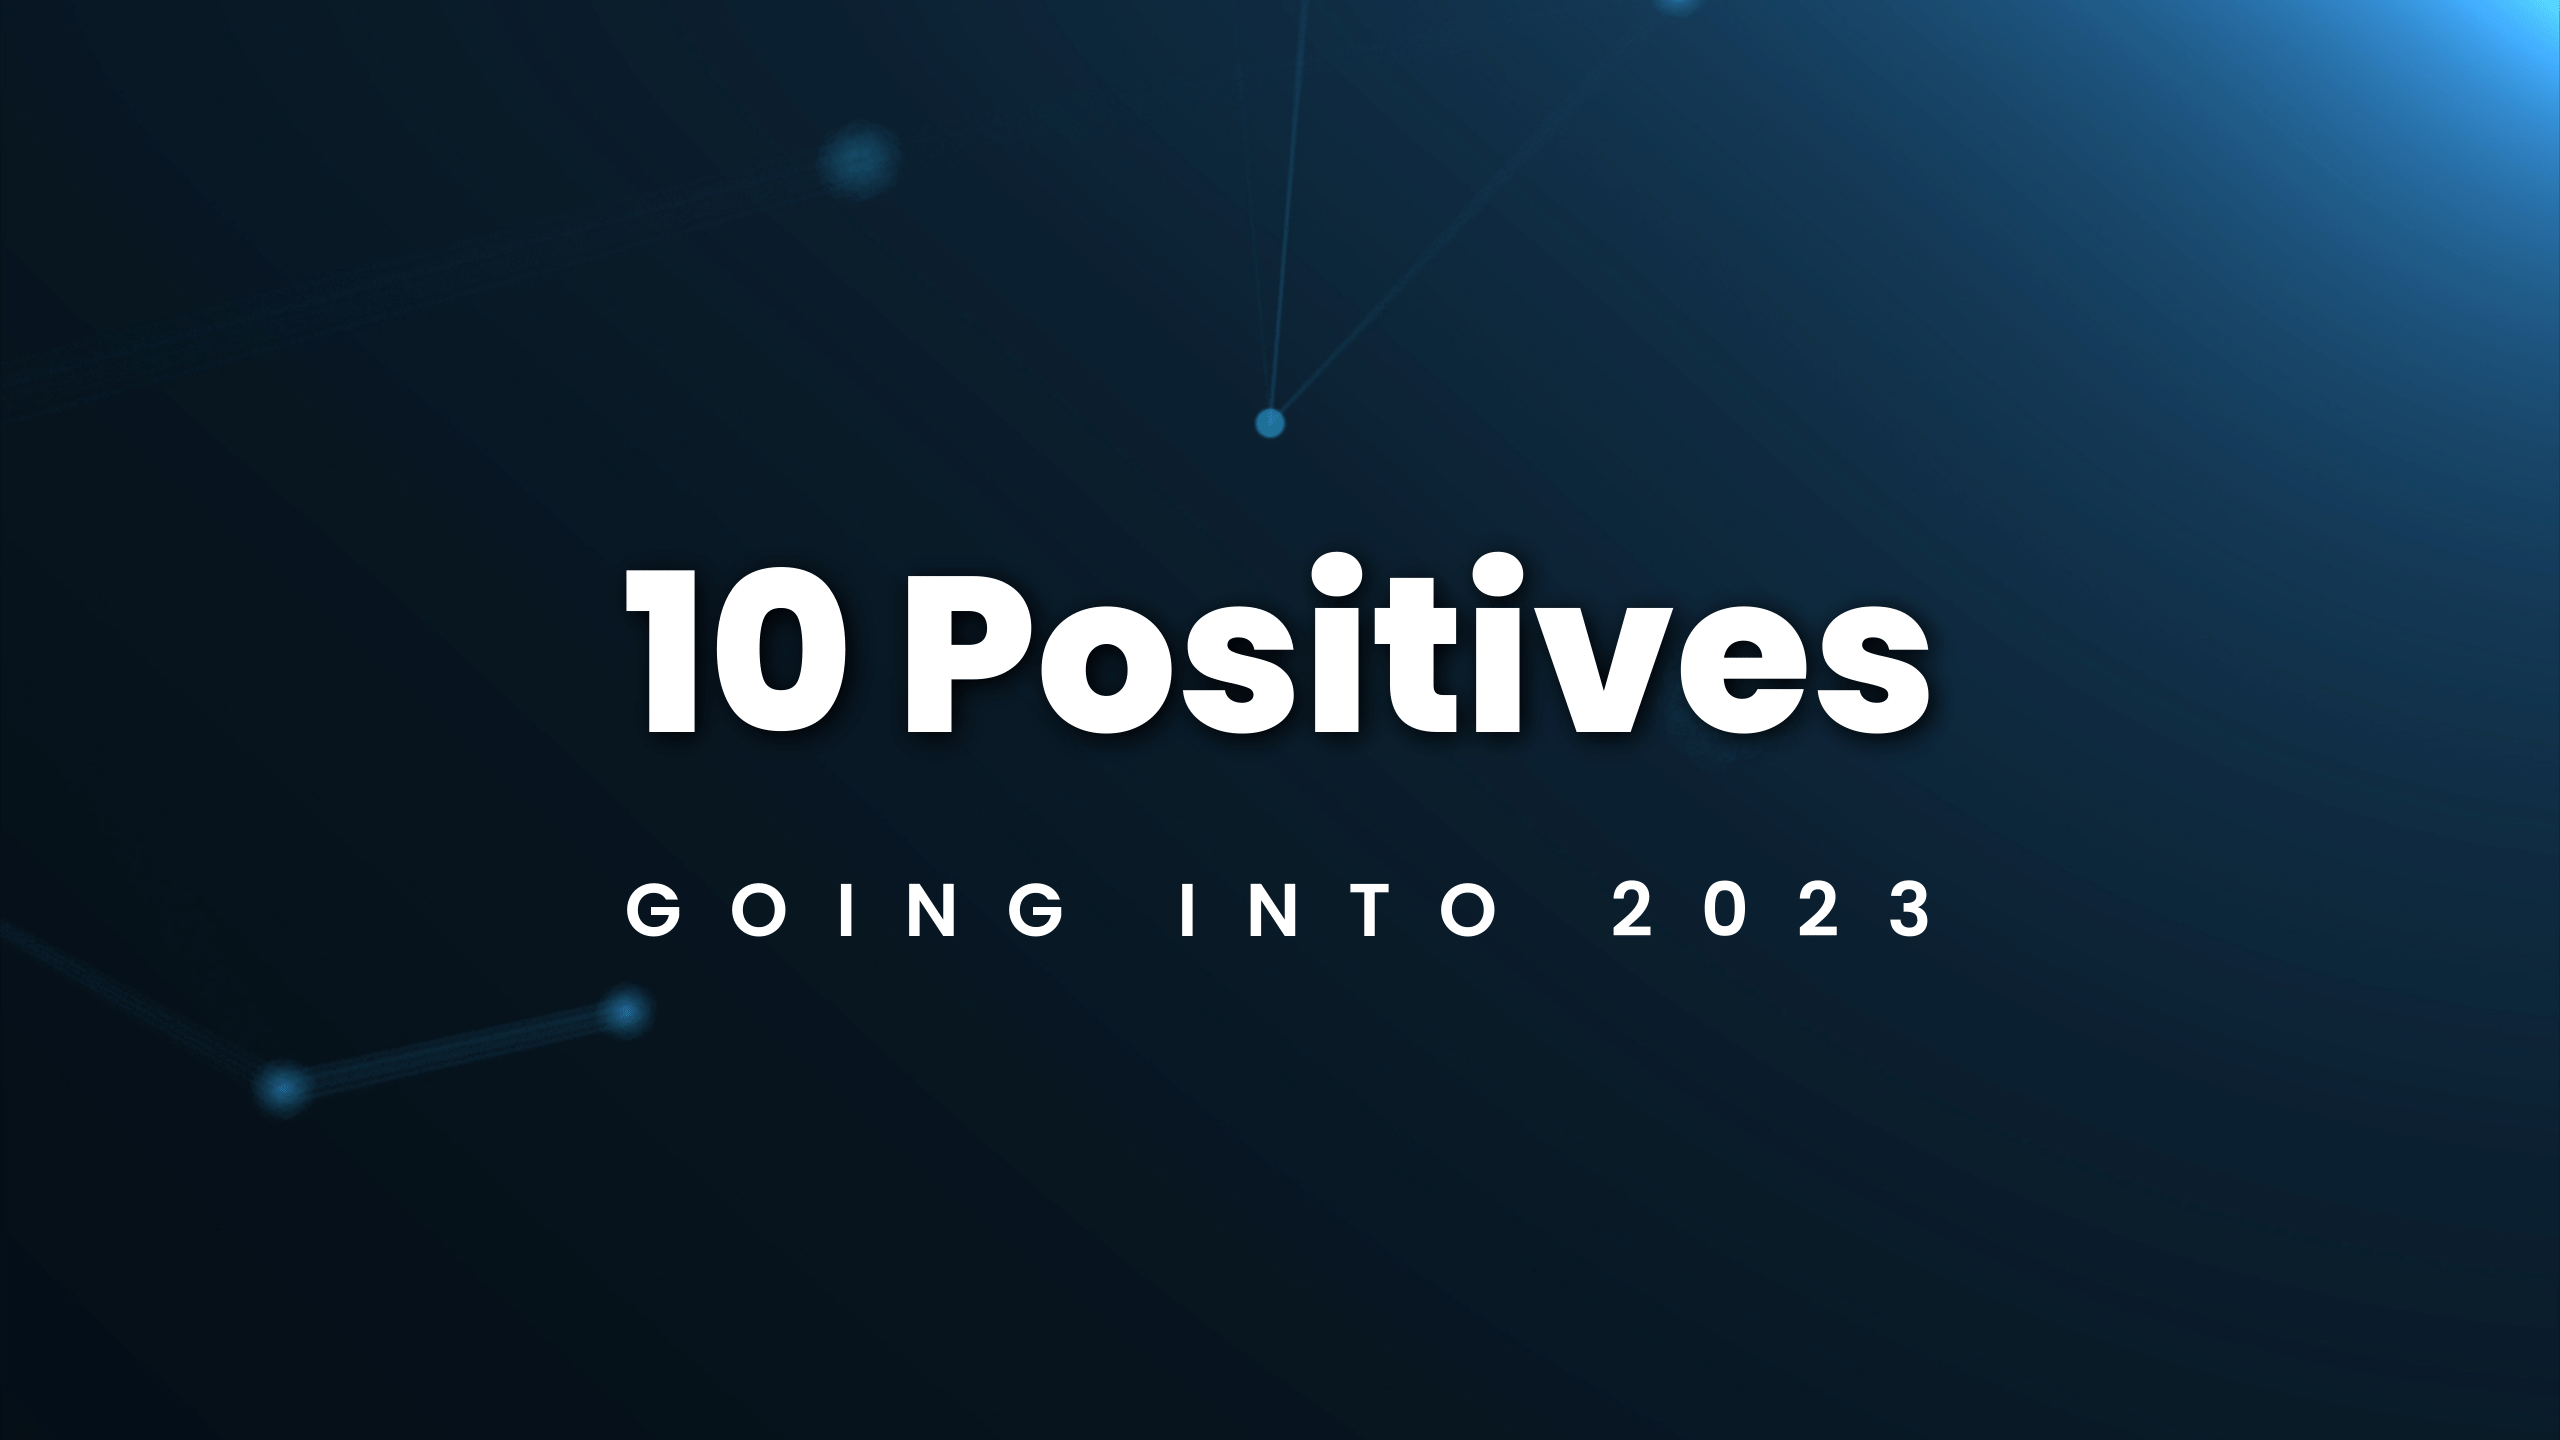 10 Positives Going Into 2023